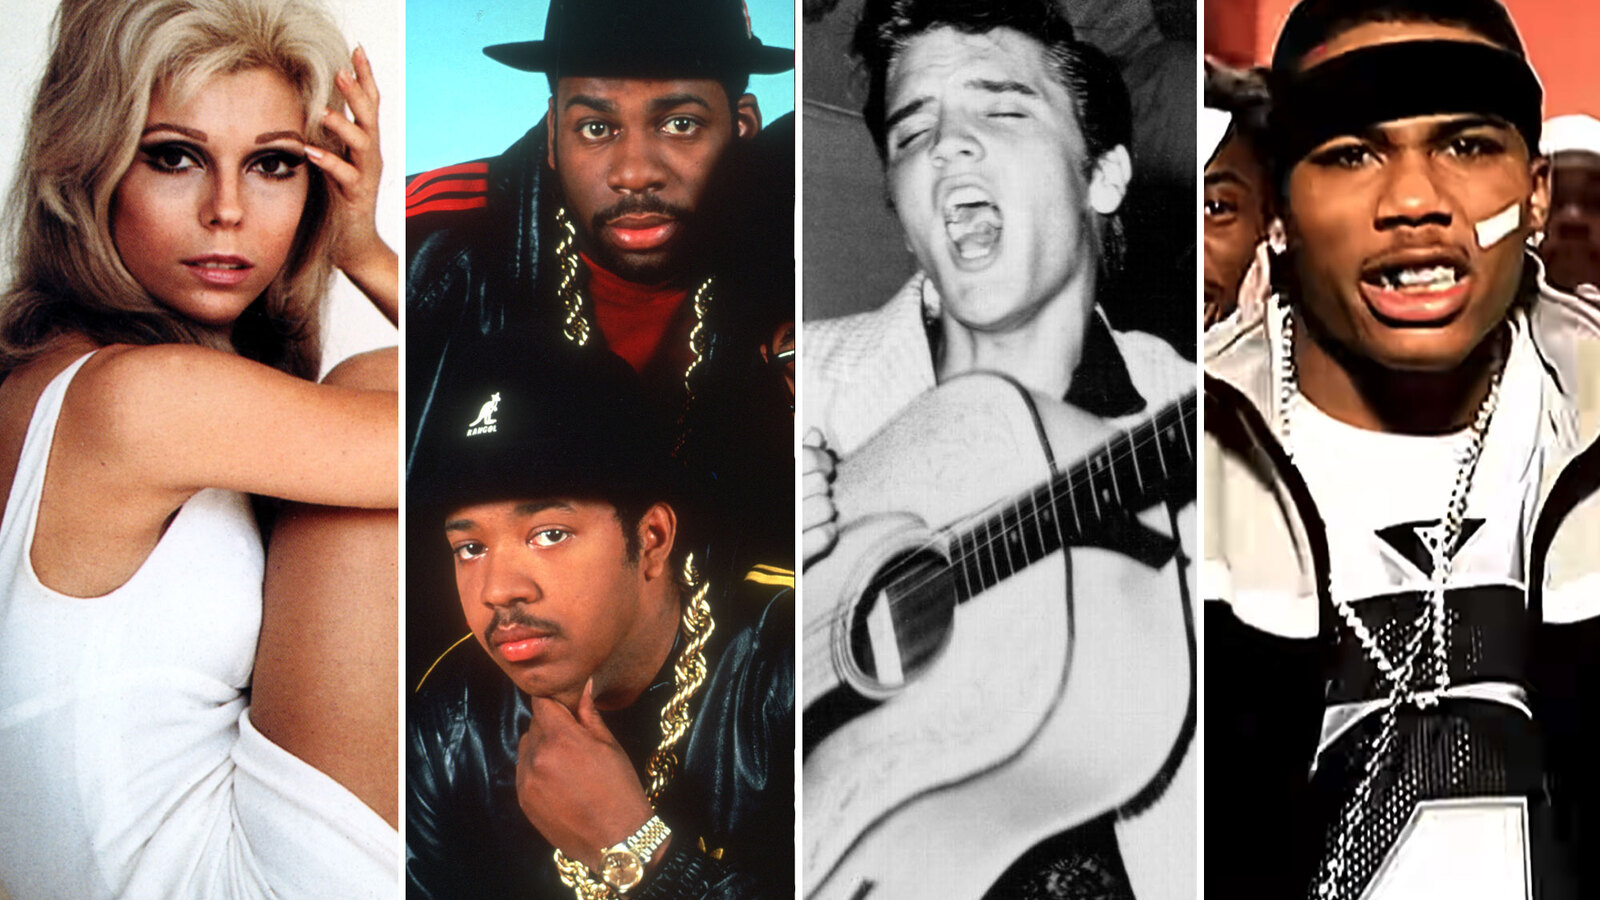 Just for kicks: 20 memorable songs about shoes | Yardbarker